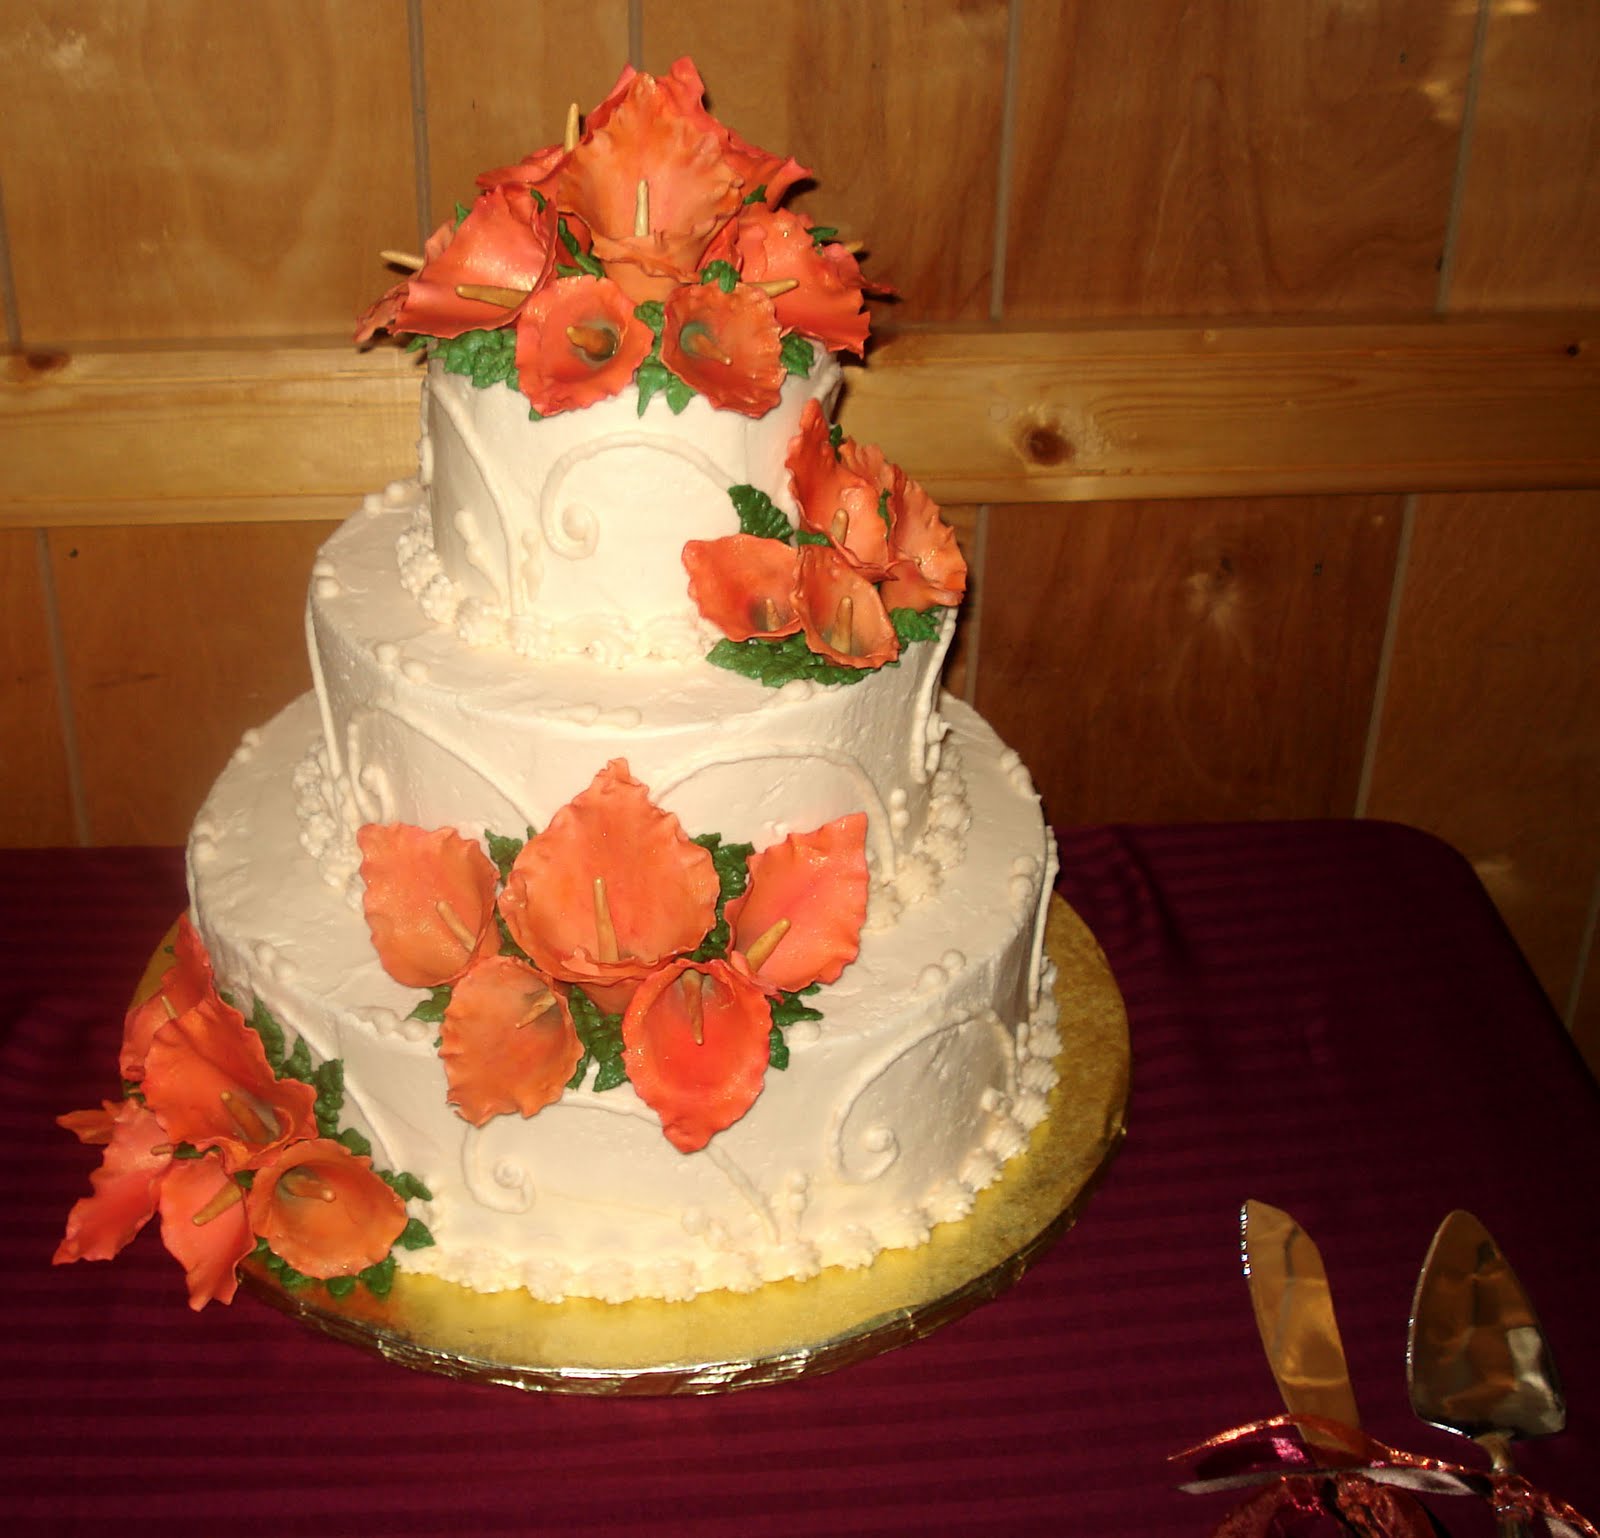 The wedding used fall colors.